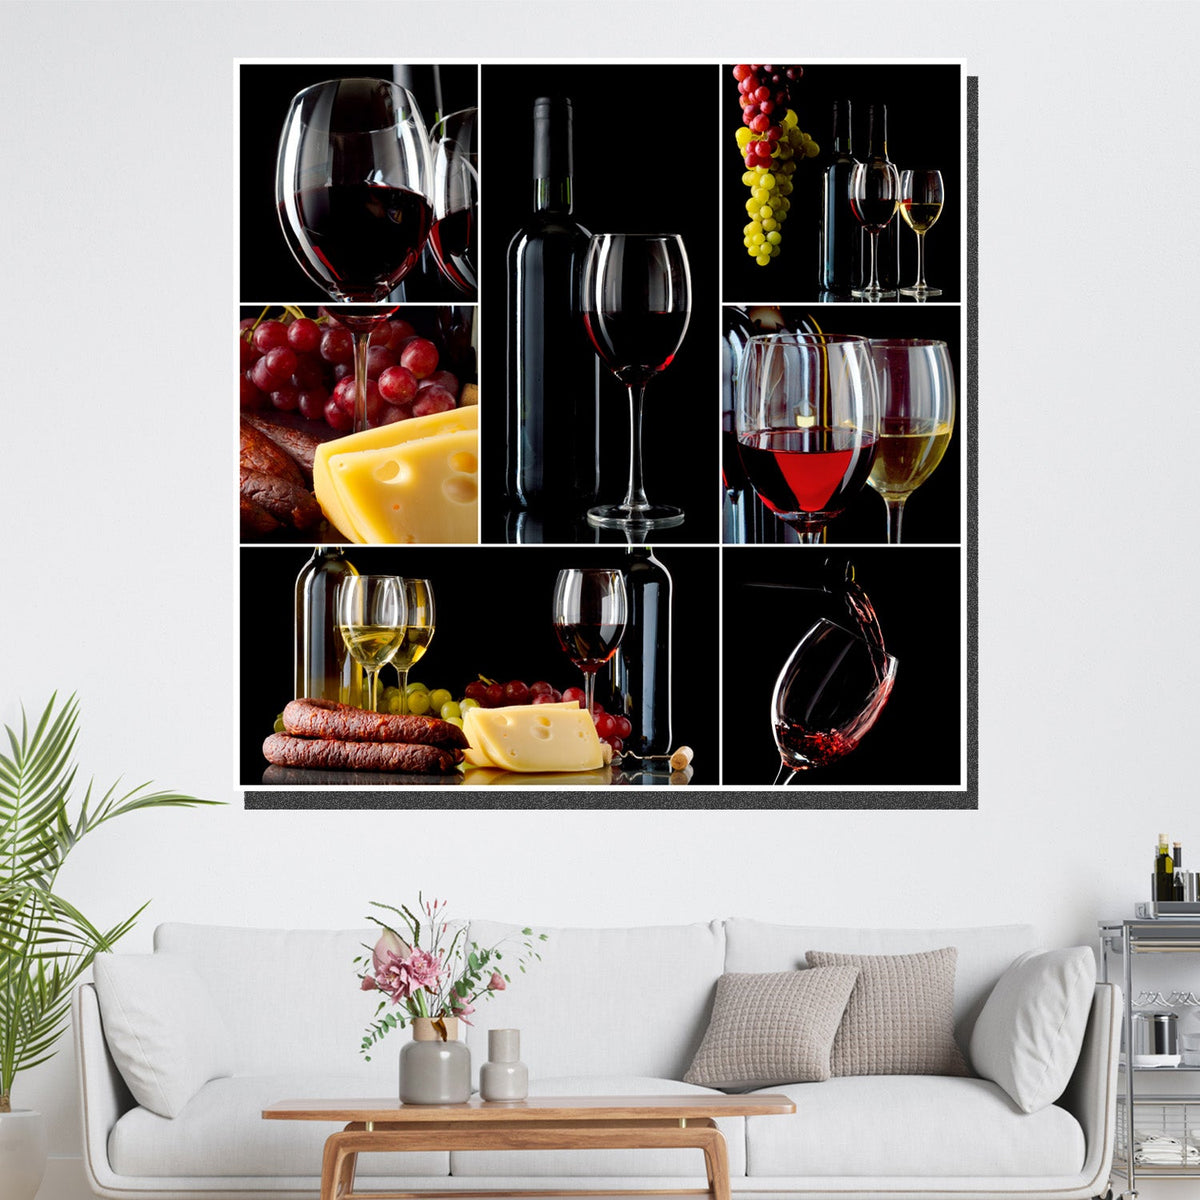 https://cdn.shopify.com/s/files/1/0387/9986/8044/products/WineGrapesandCheeseCollageCanvasArtprintStretched-4.jpg